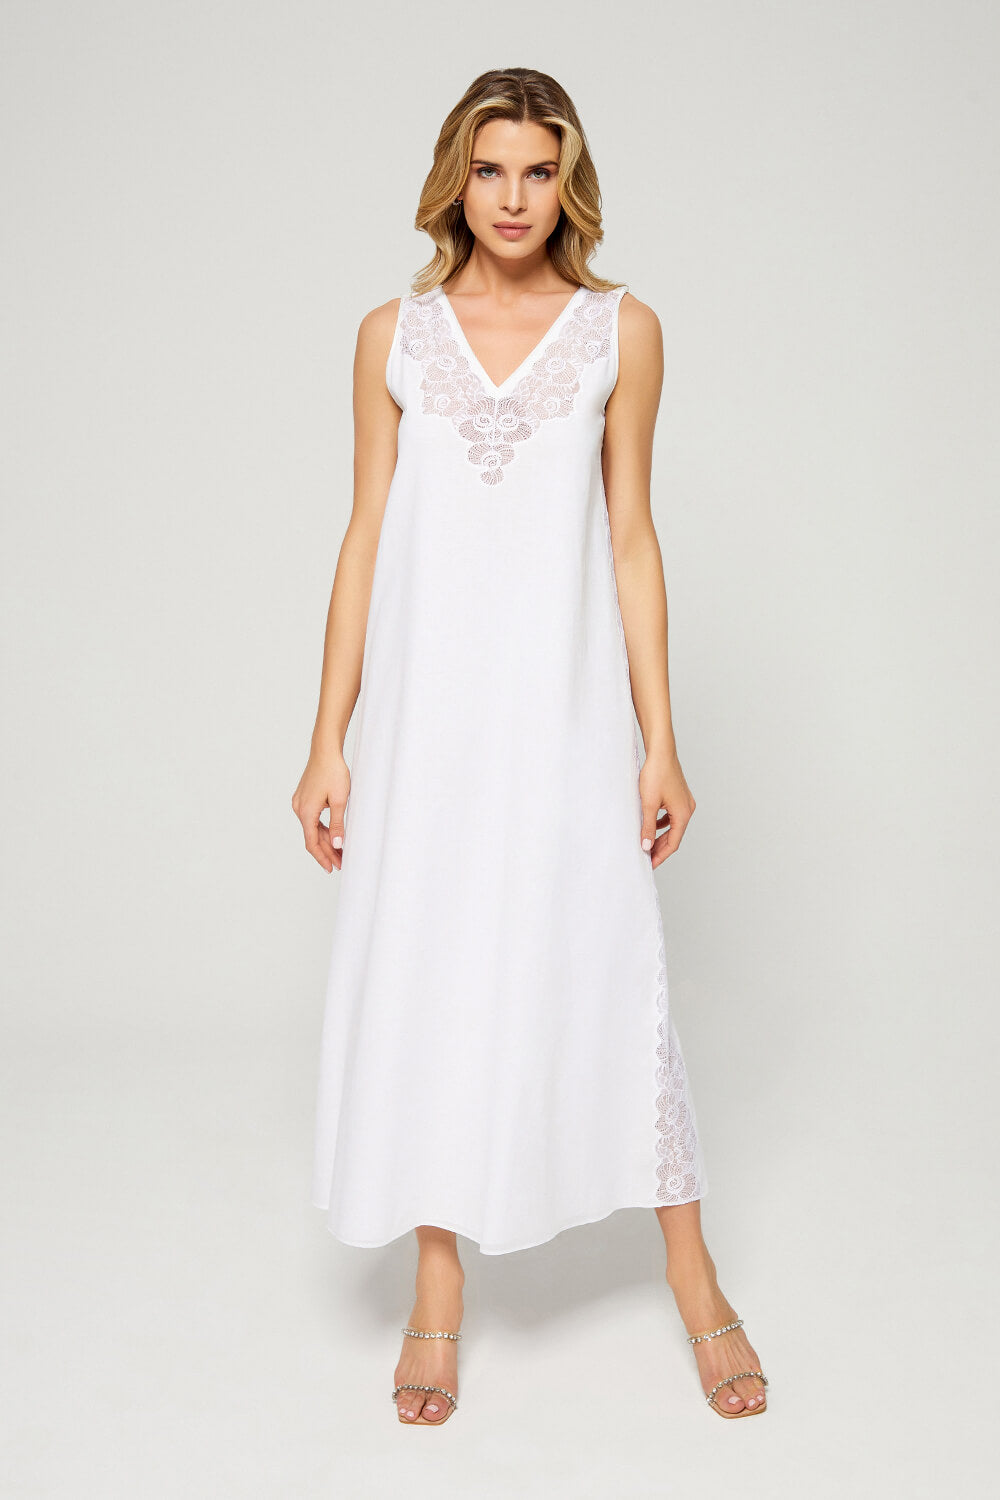 Patty the Babe- Long and Buttoned Cotton Voile Nightgown- Off White